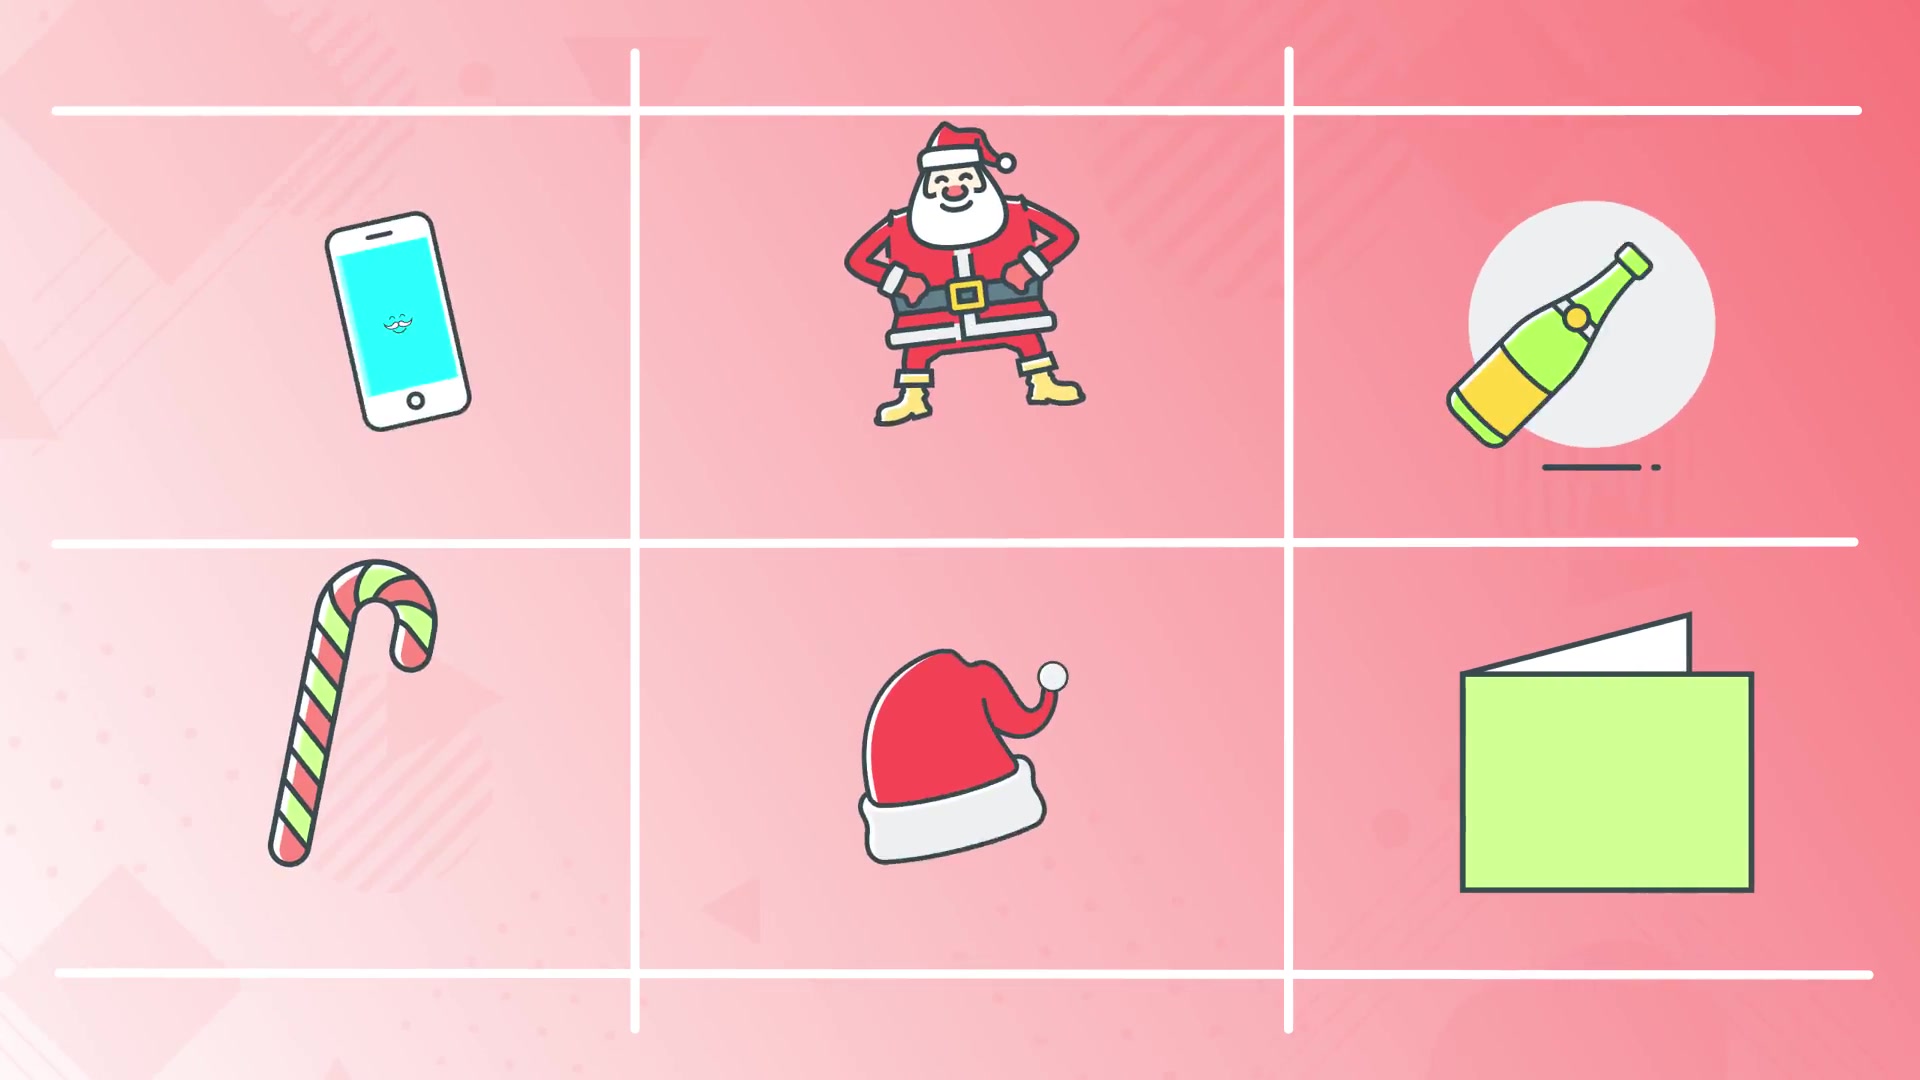 Mary Christmas 30 Animated Icons - Download Videohive 22866488